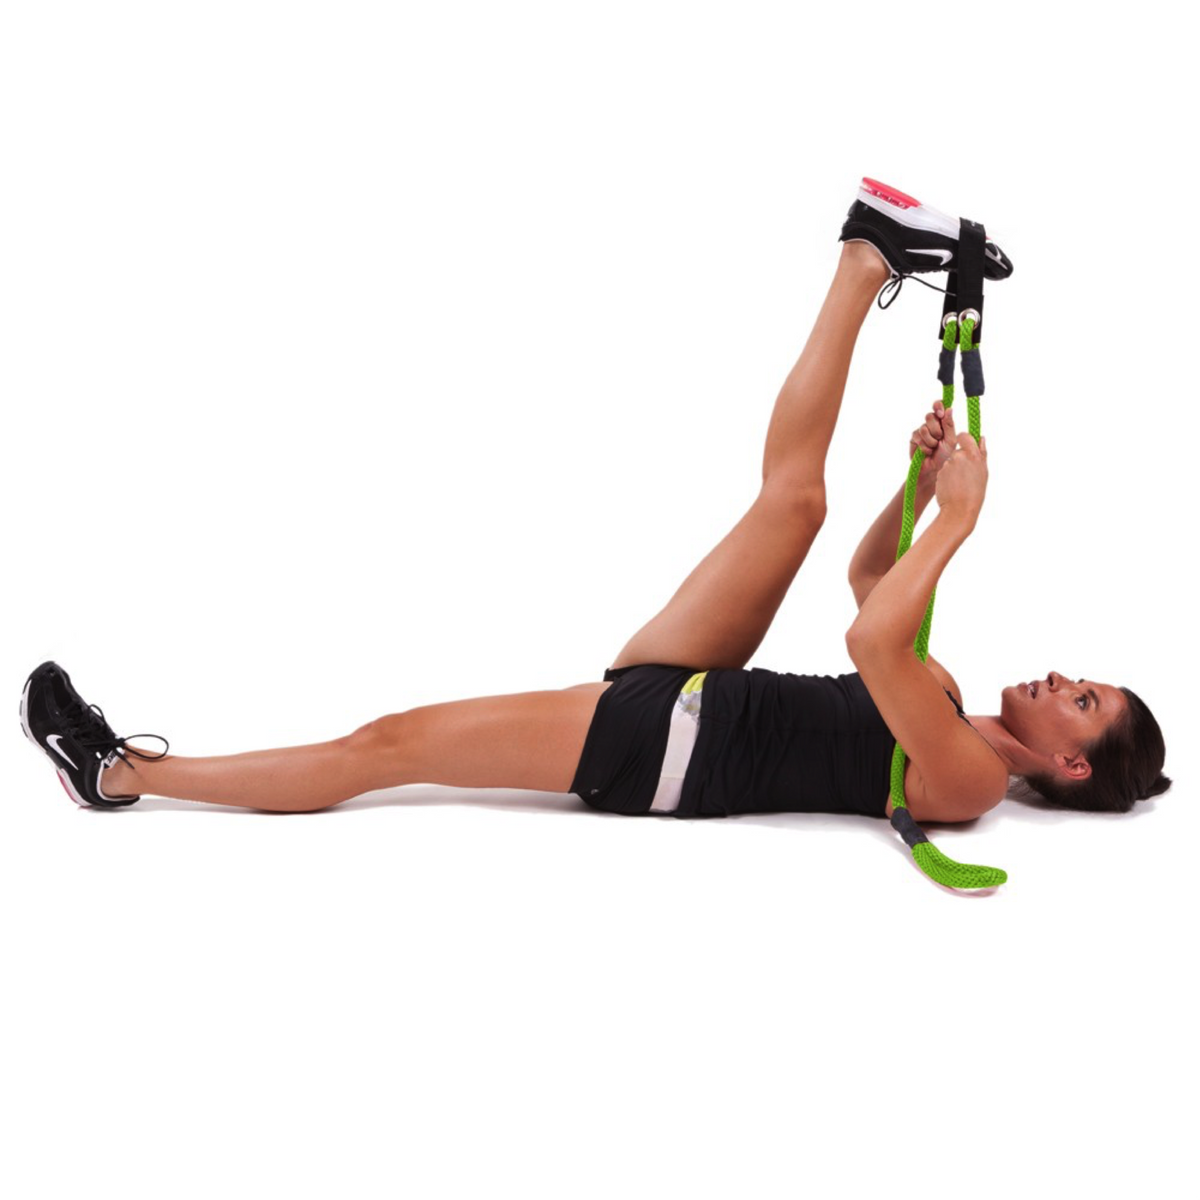 Go-Fit strech rope lv2